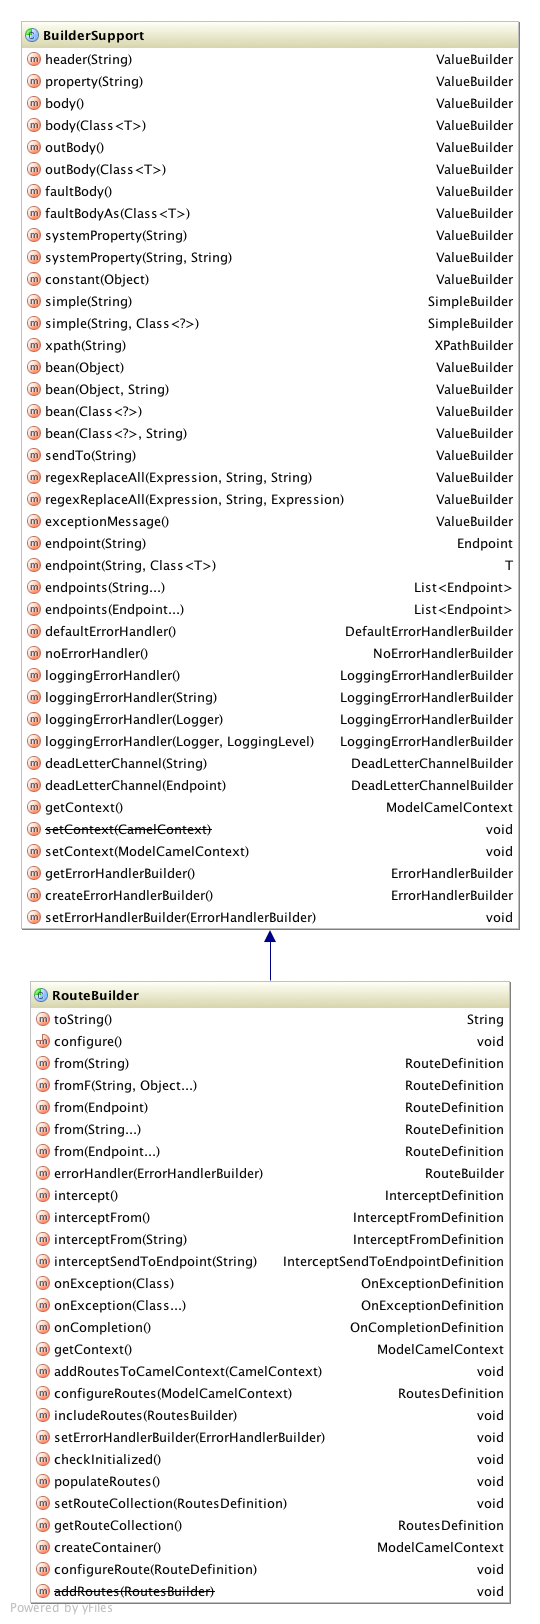 class diagram of route builder with methods